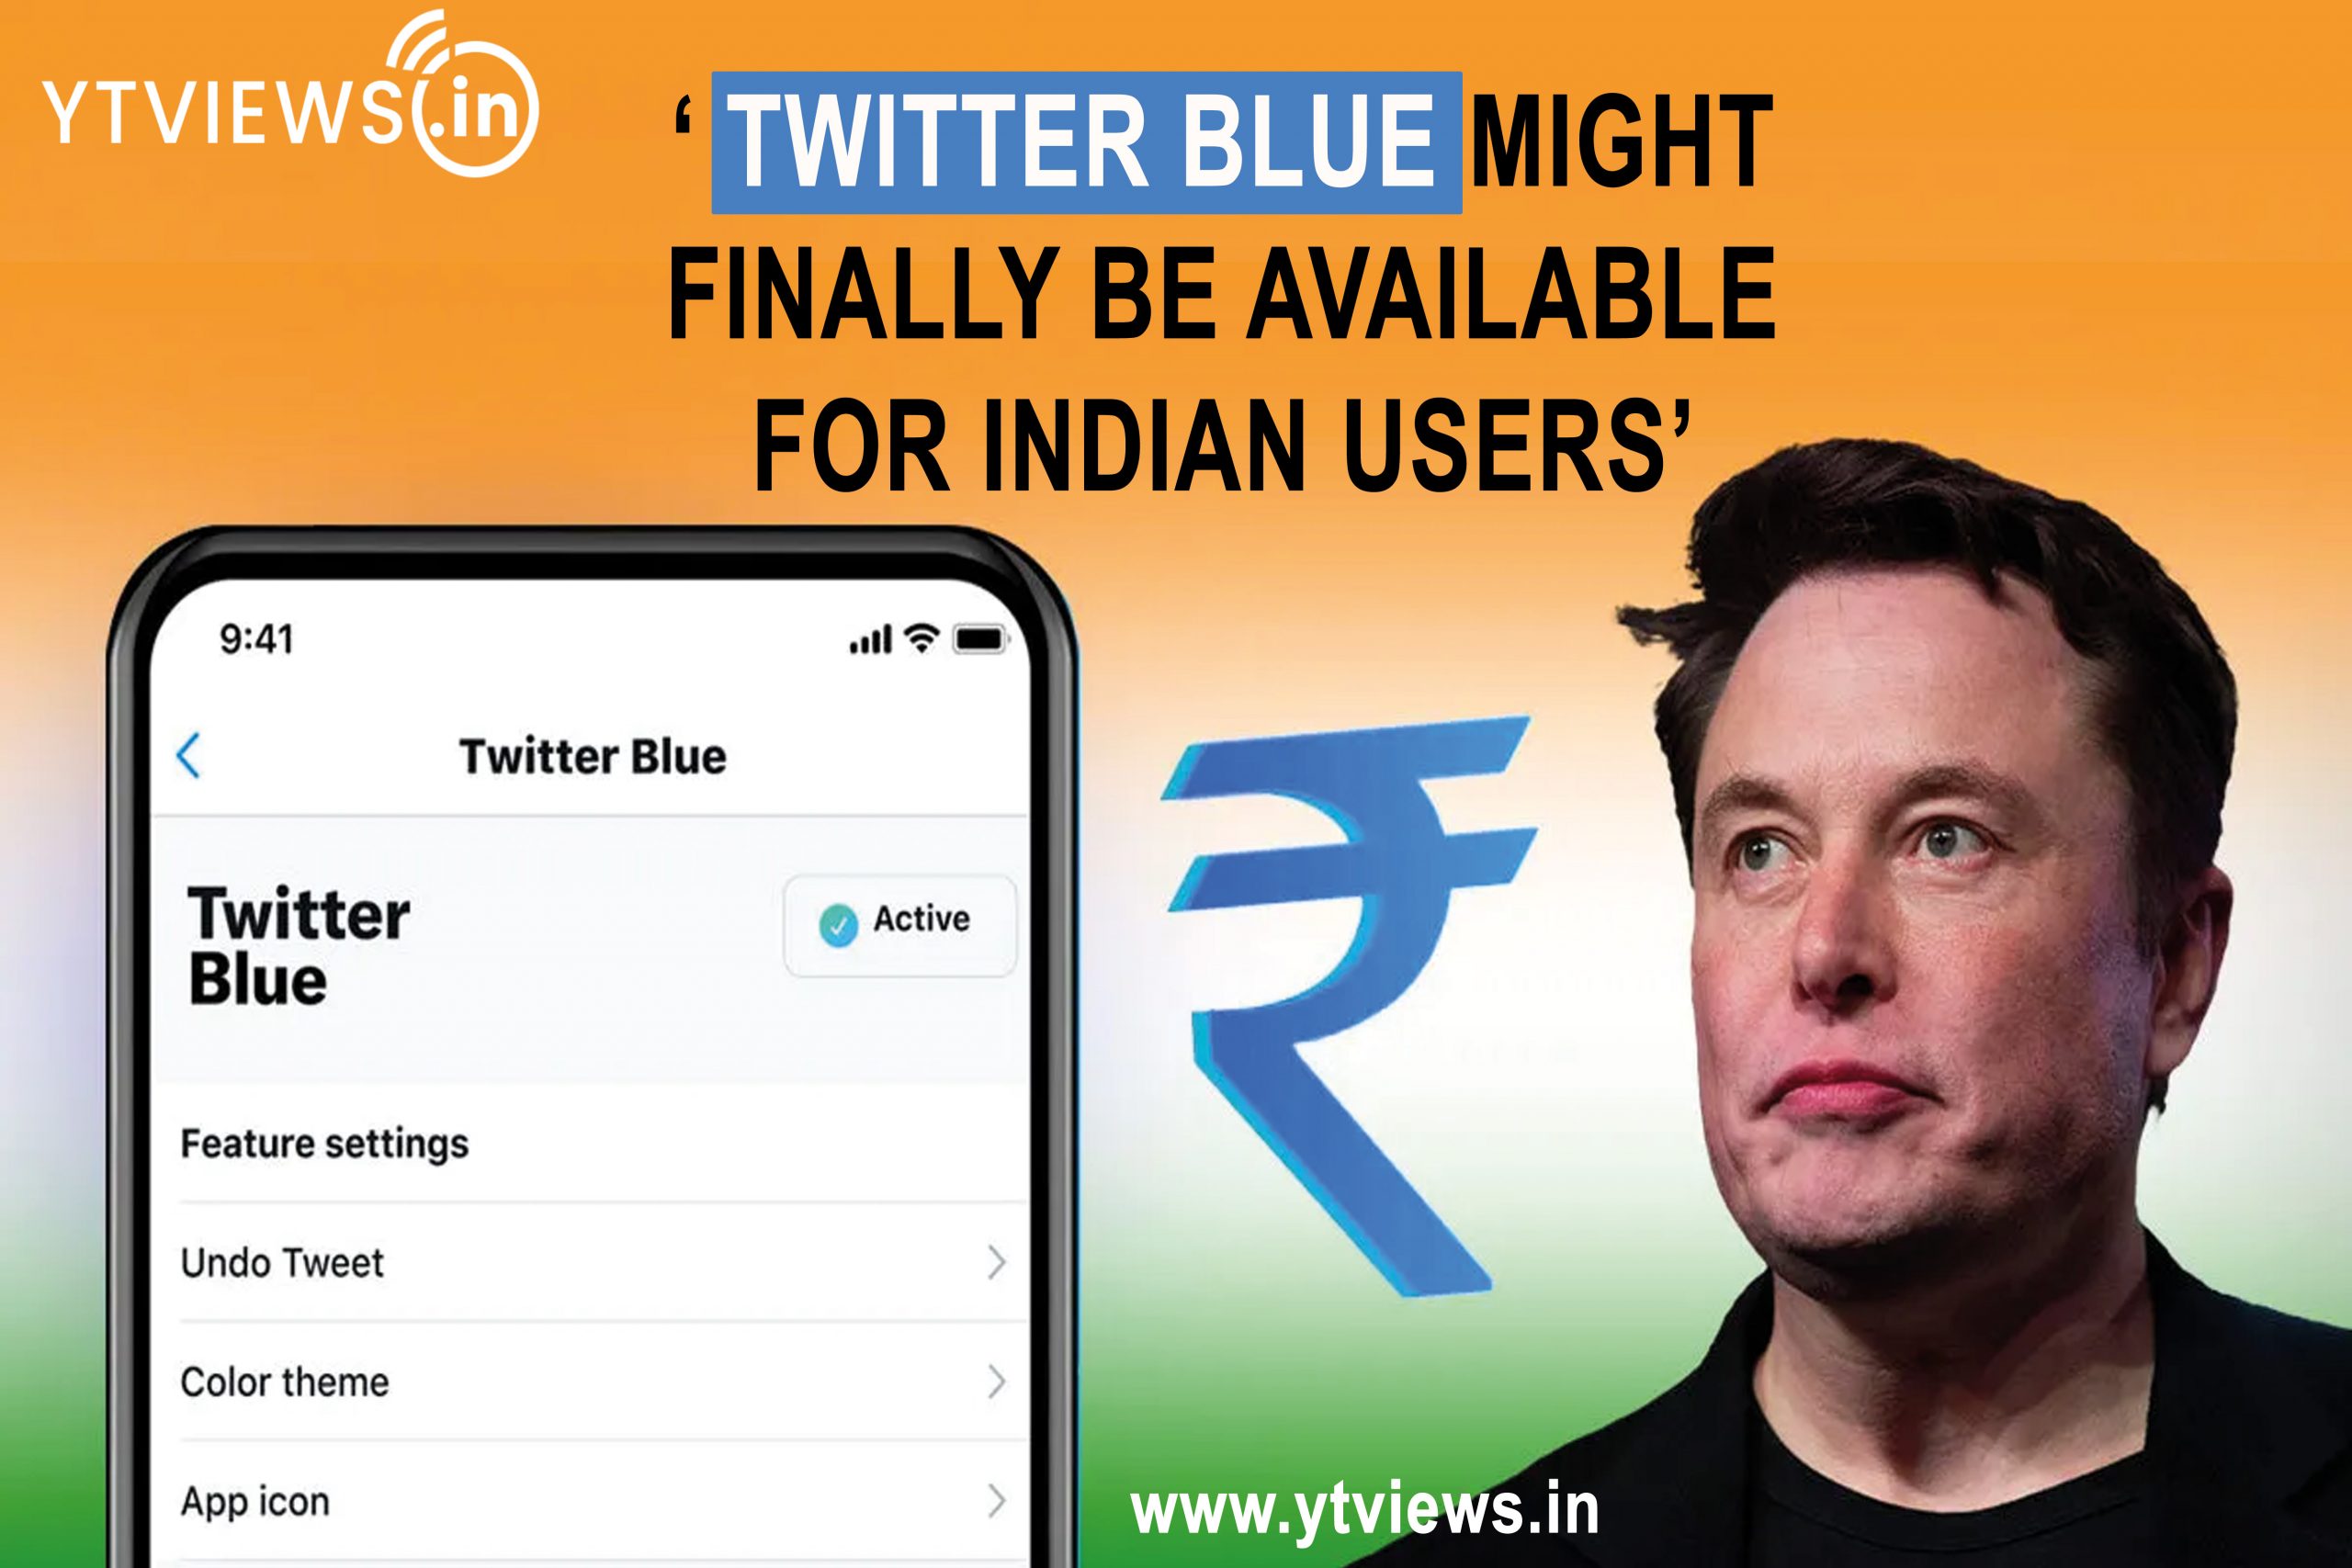 Twitter Blue might finally be available for Indian users